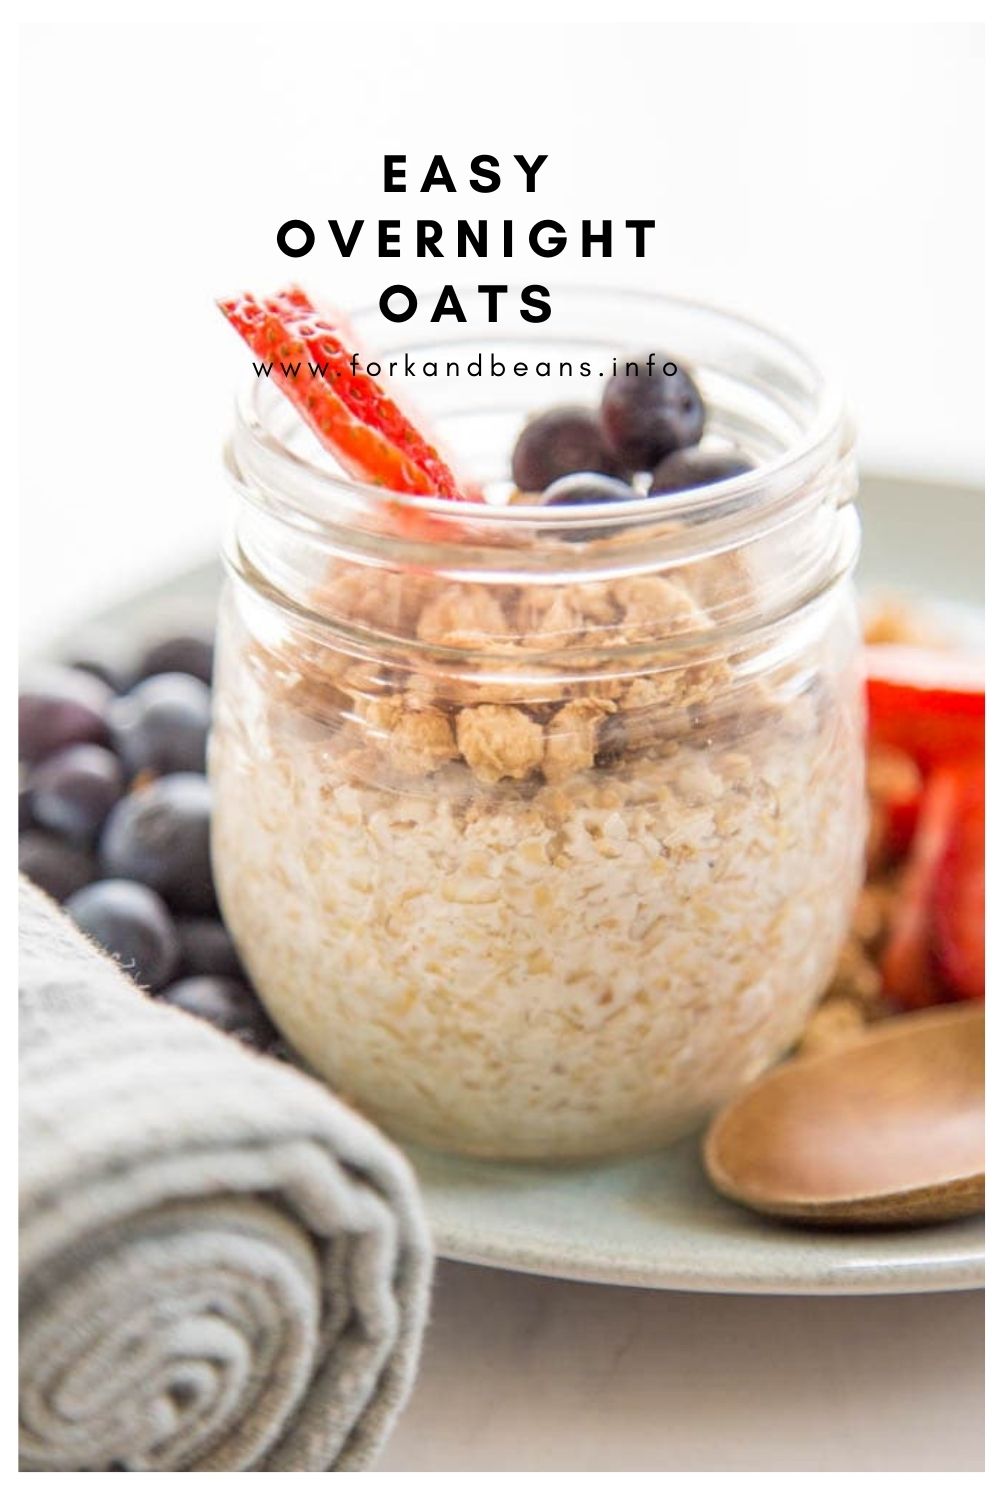 Chia Seed Pudding or Keto “Overnight Oats”